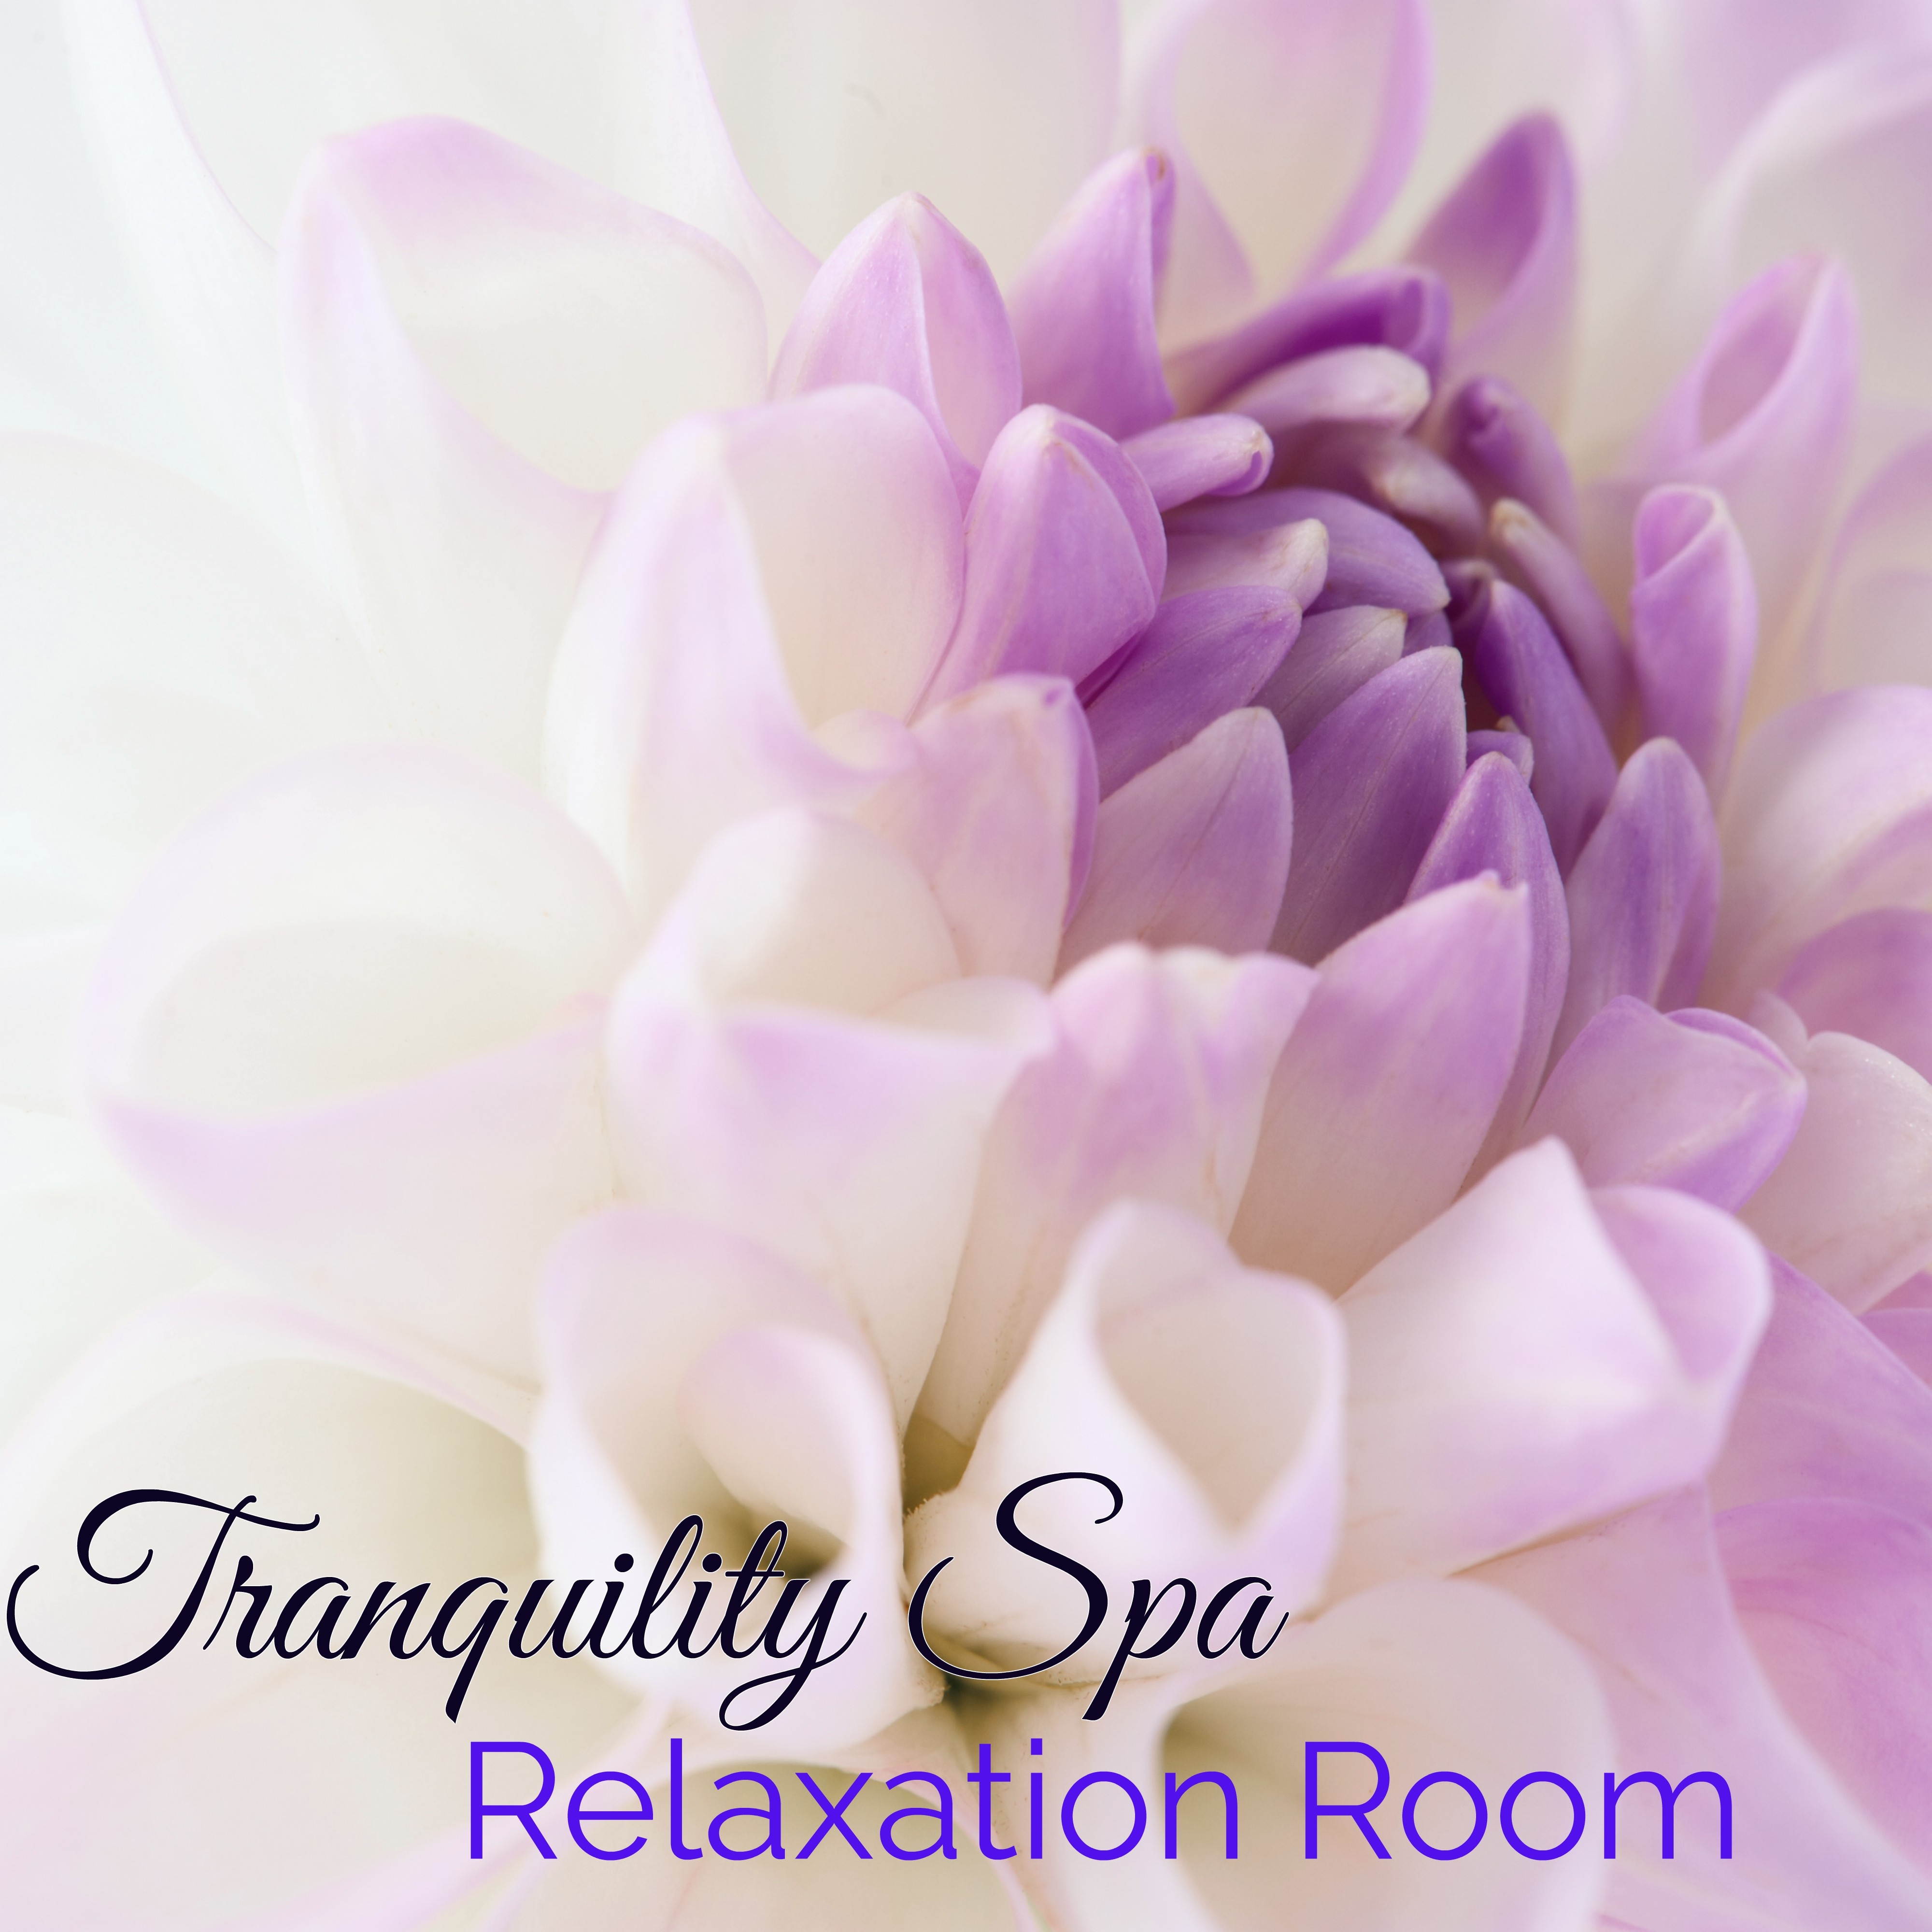 Tranquility Spa Relaxation Room  Calming and Soothing Music for Massage, Deep Relaxation, Autogenic Training and Shiatsu